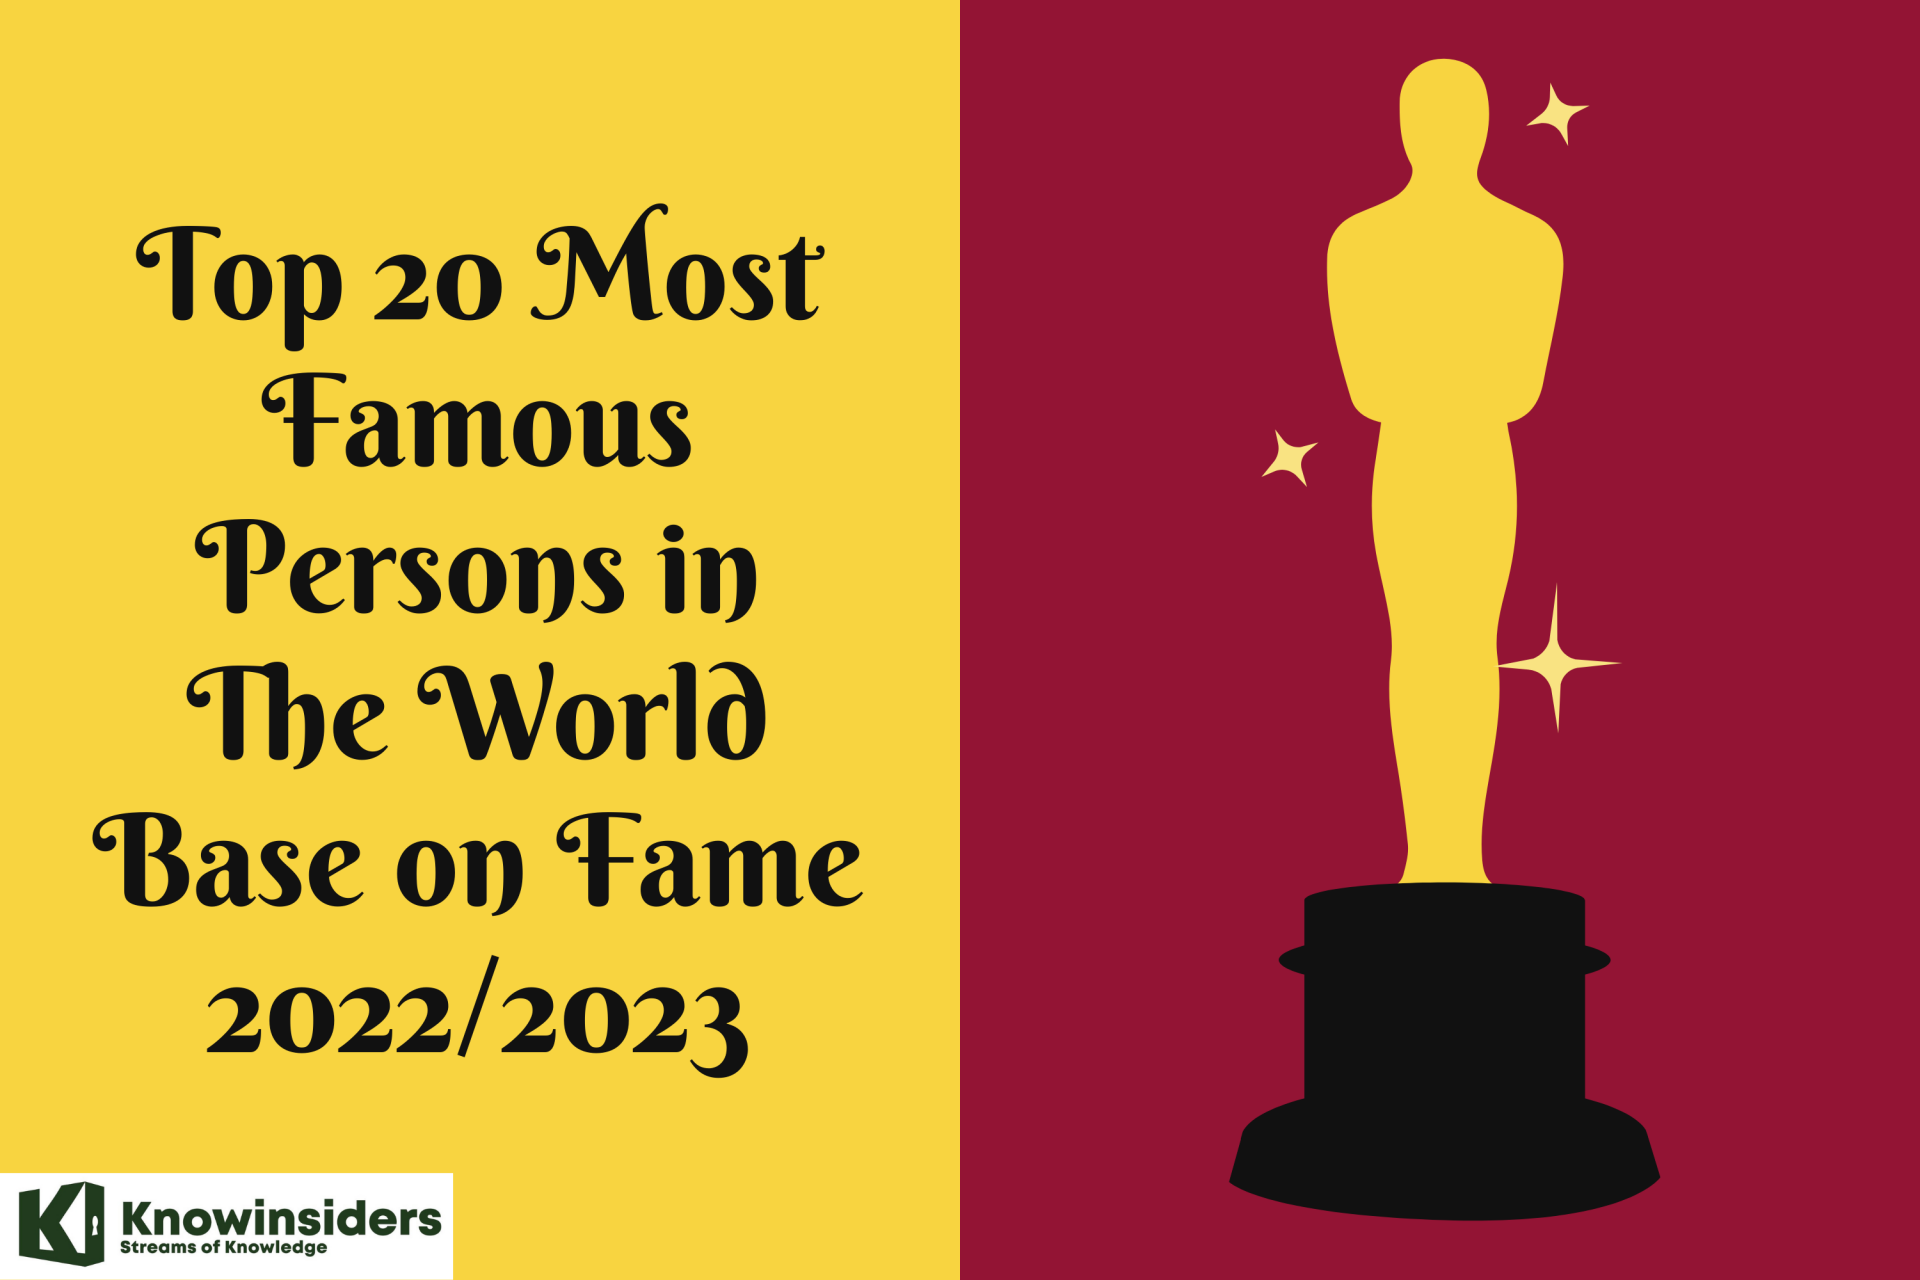 Top 20 Most Famous Persons in The World Base on Fame 2022/2023